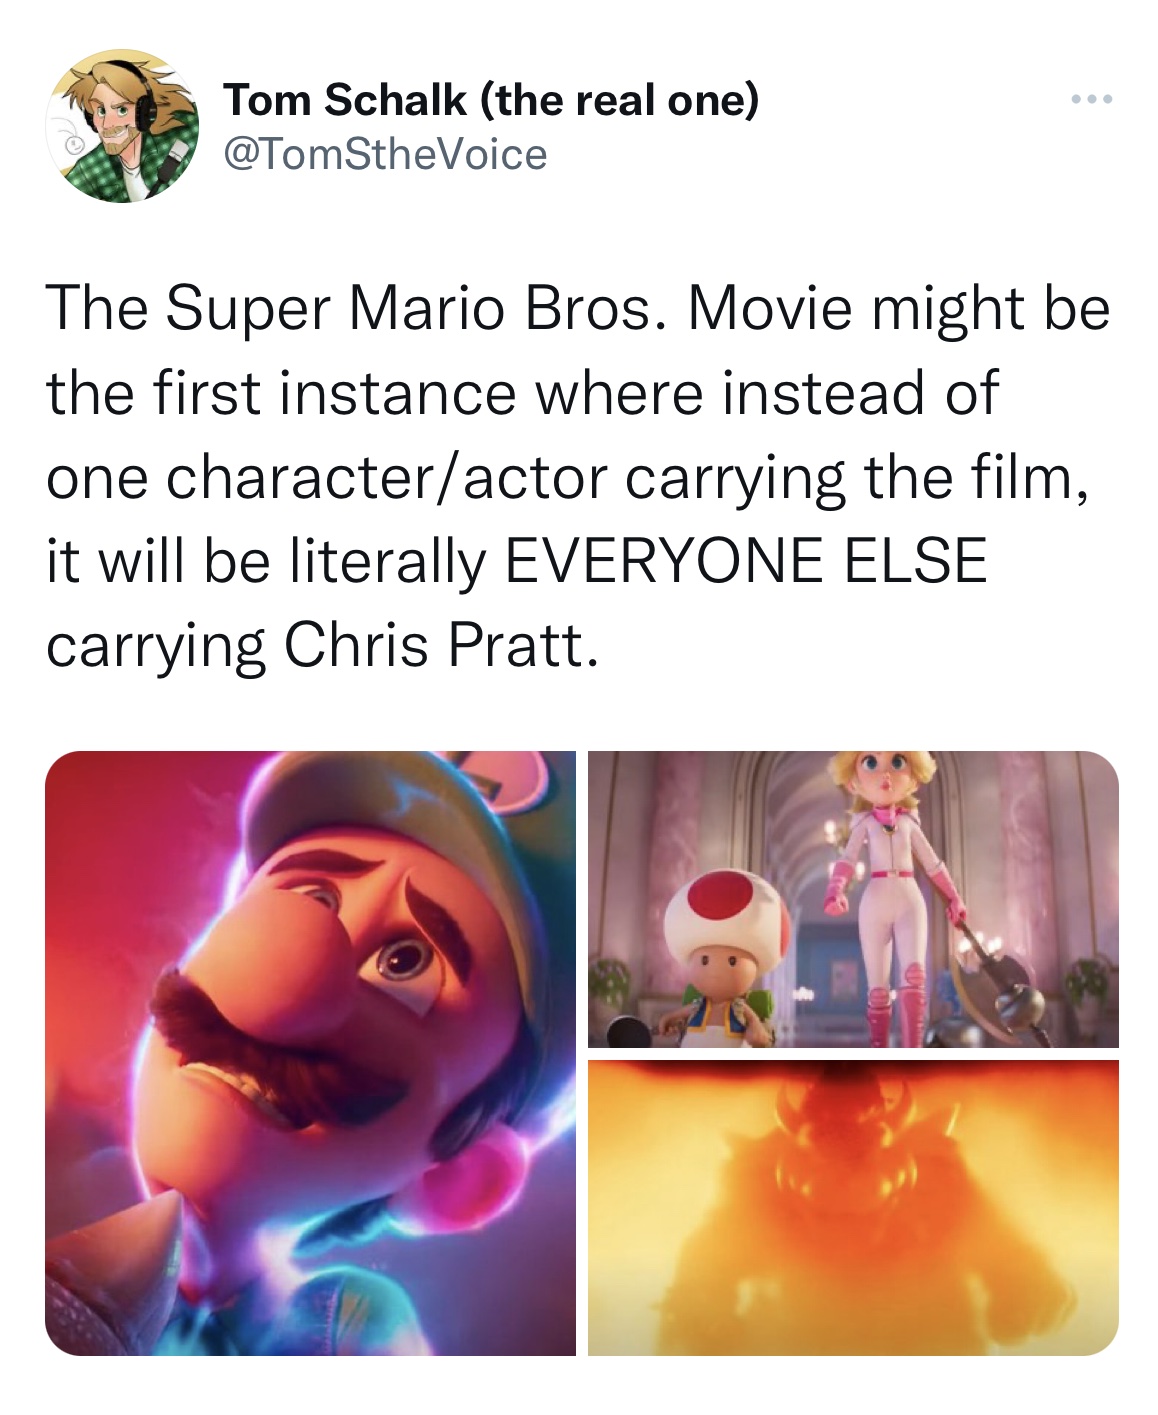 gaming memes - mario movie meme - Tom Schalk the real one The Super Mario Bros. Movie might be the first instance where instead of one characteractor carrying the film, it will be literally Everyone Else carrying Chris Pratt.